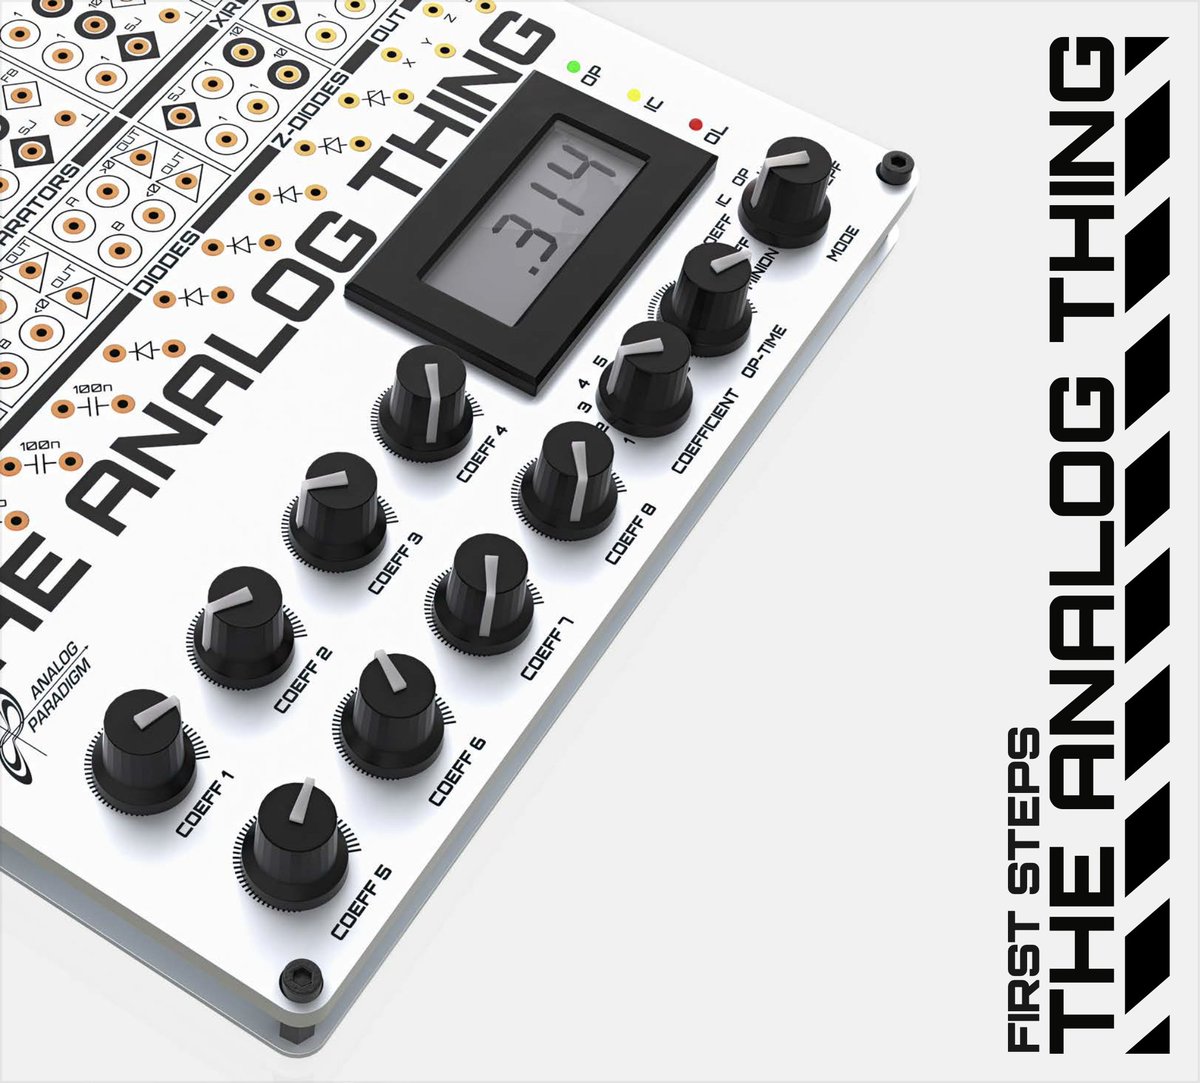 The improved and extended second edition of the THAT First Steps guide is online: the-analog-thing.org/THAT_First_Ste… #anabrid #THAT #THEANALOGTHING #analogcomputing